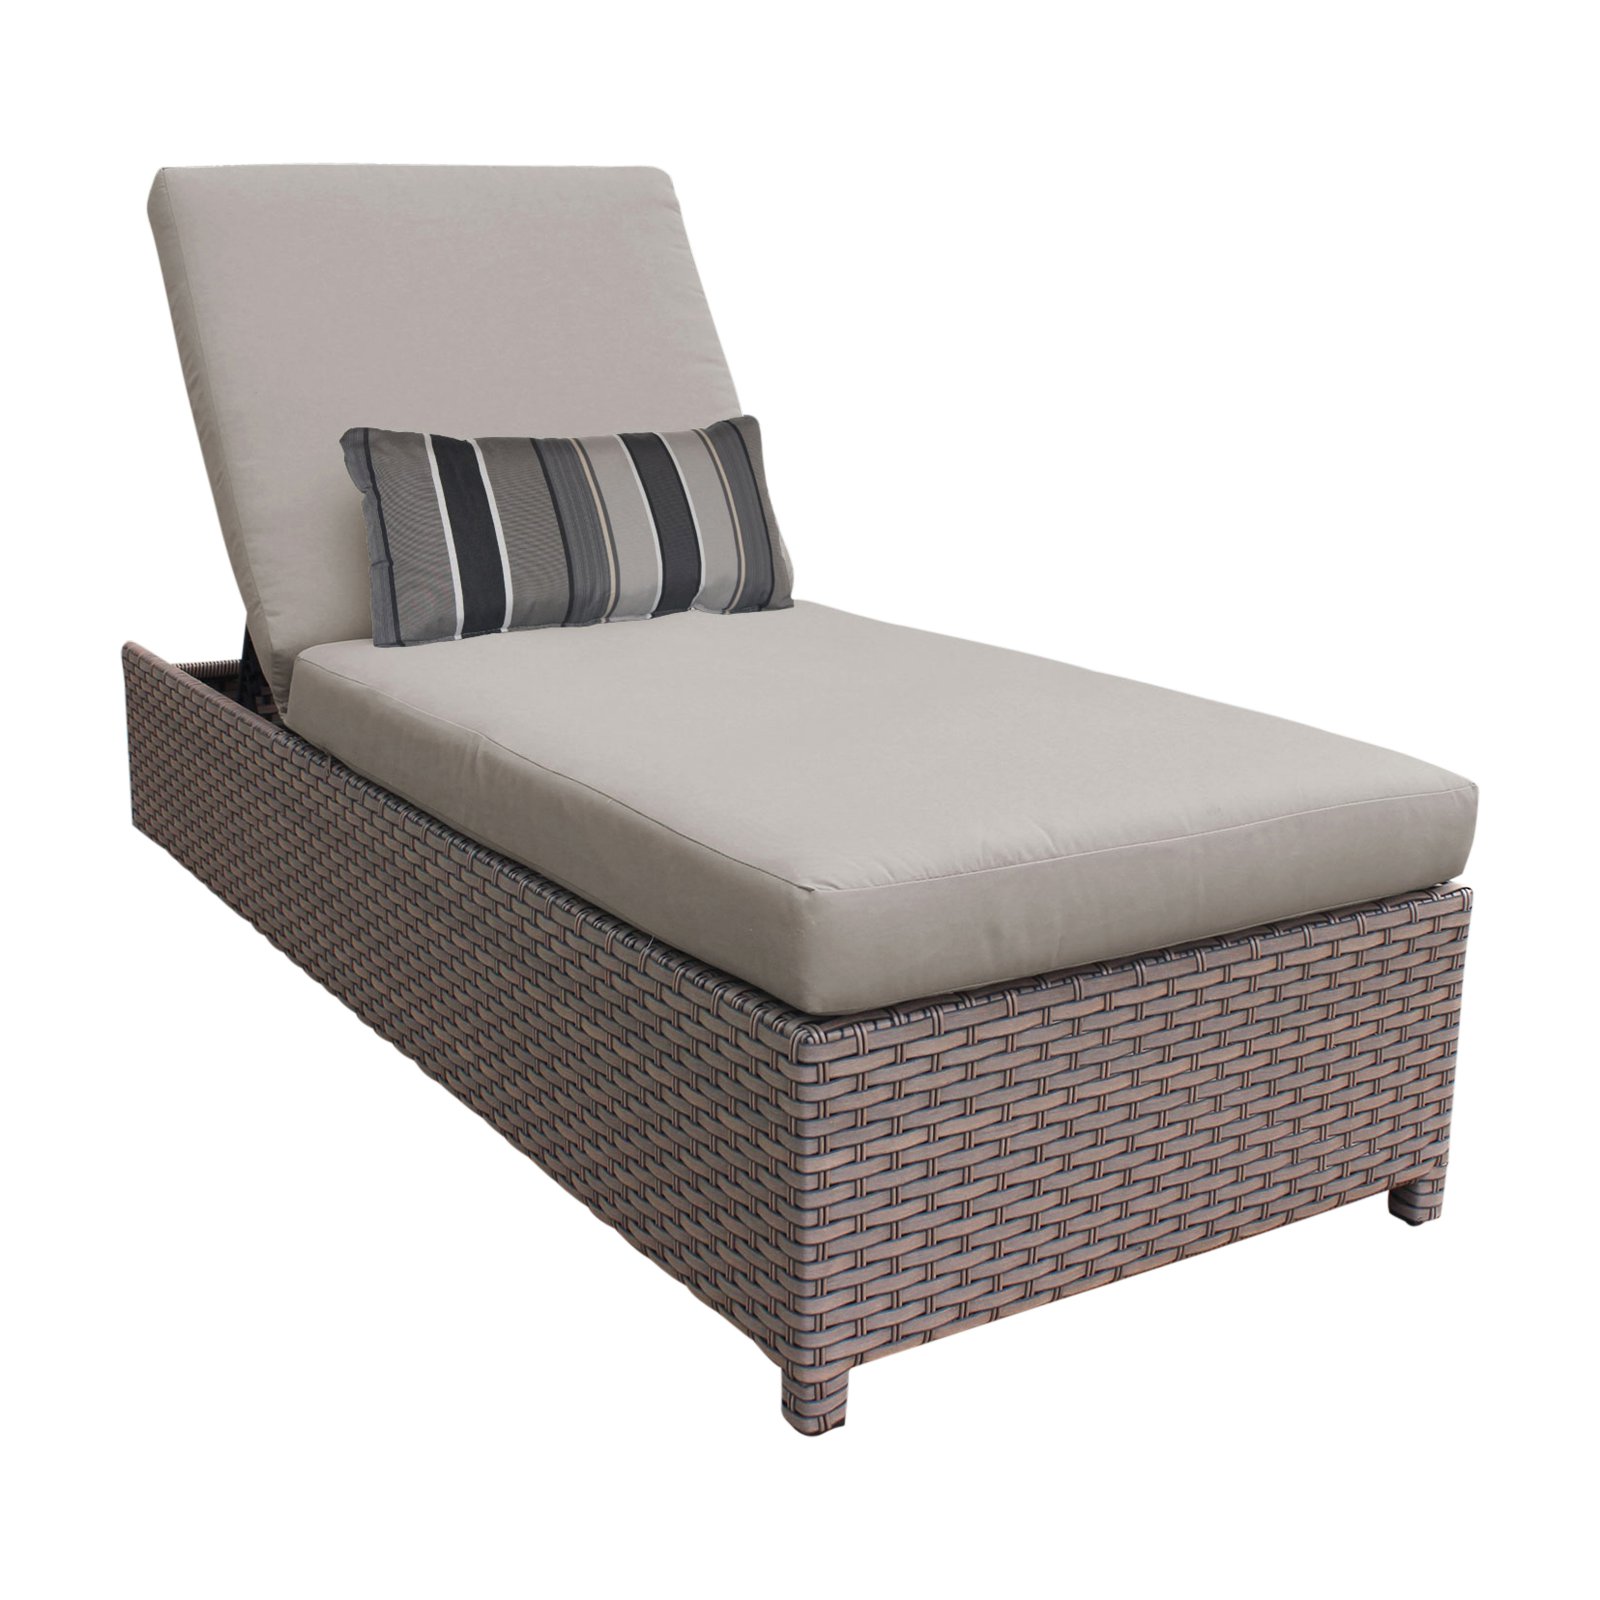 TK Classics Monterey Wheeled Wicker Outdoor Chaise Lounge Chair - image 1 of 11